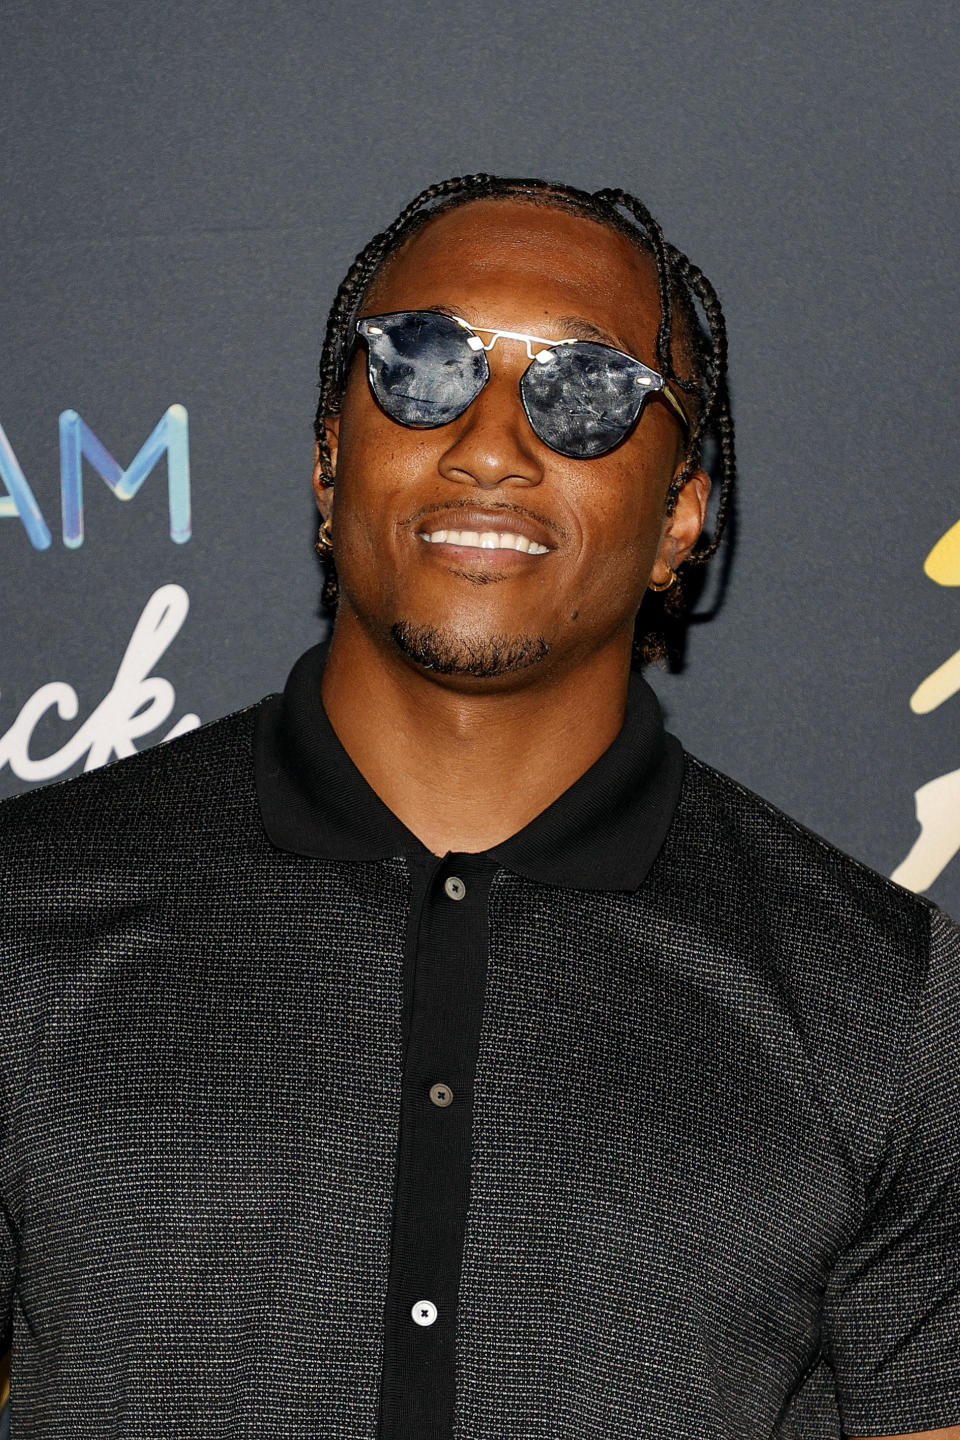 A close-up of smiling Lecrae at a red carpet event and wearing sunglasses